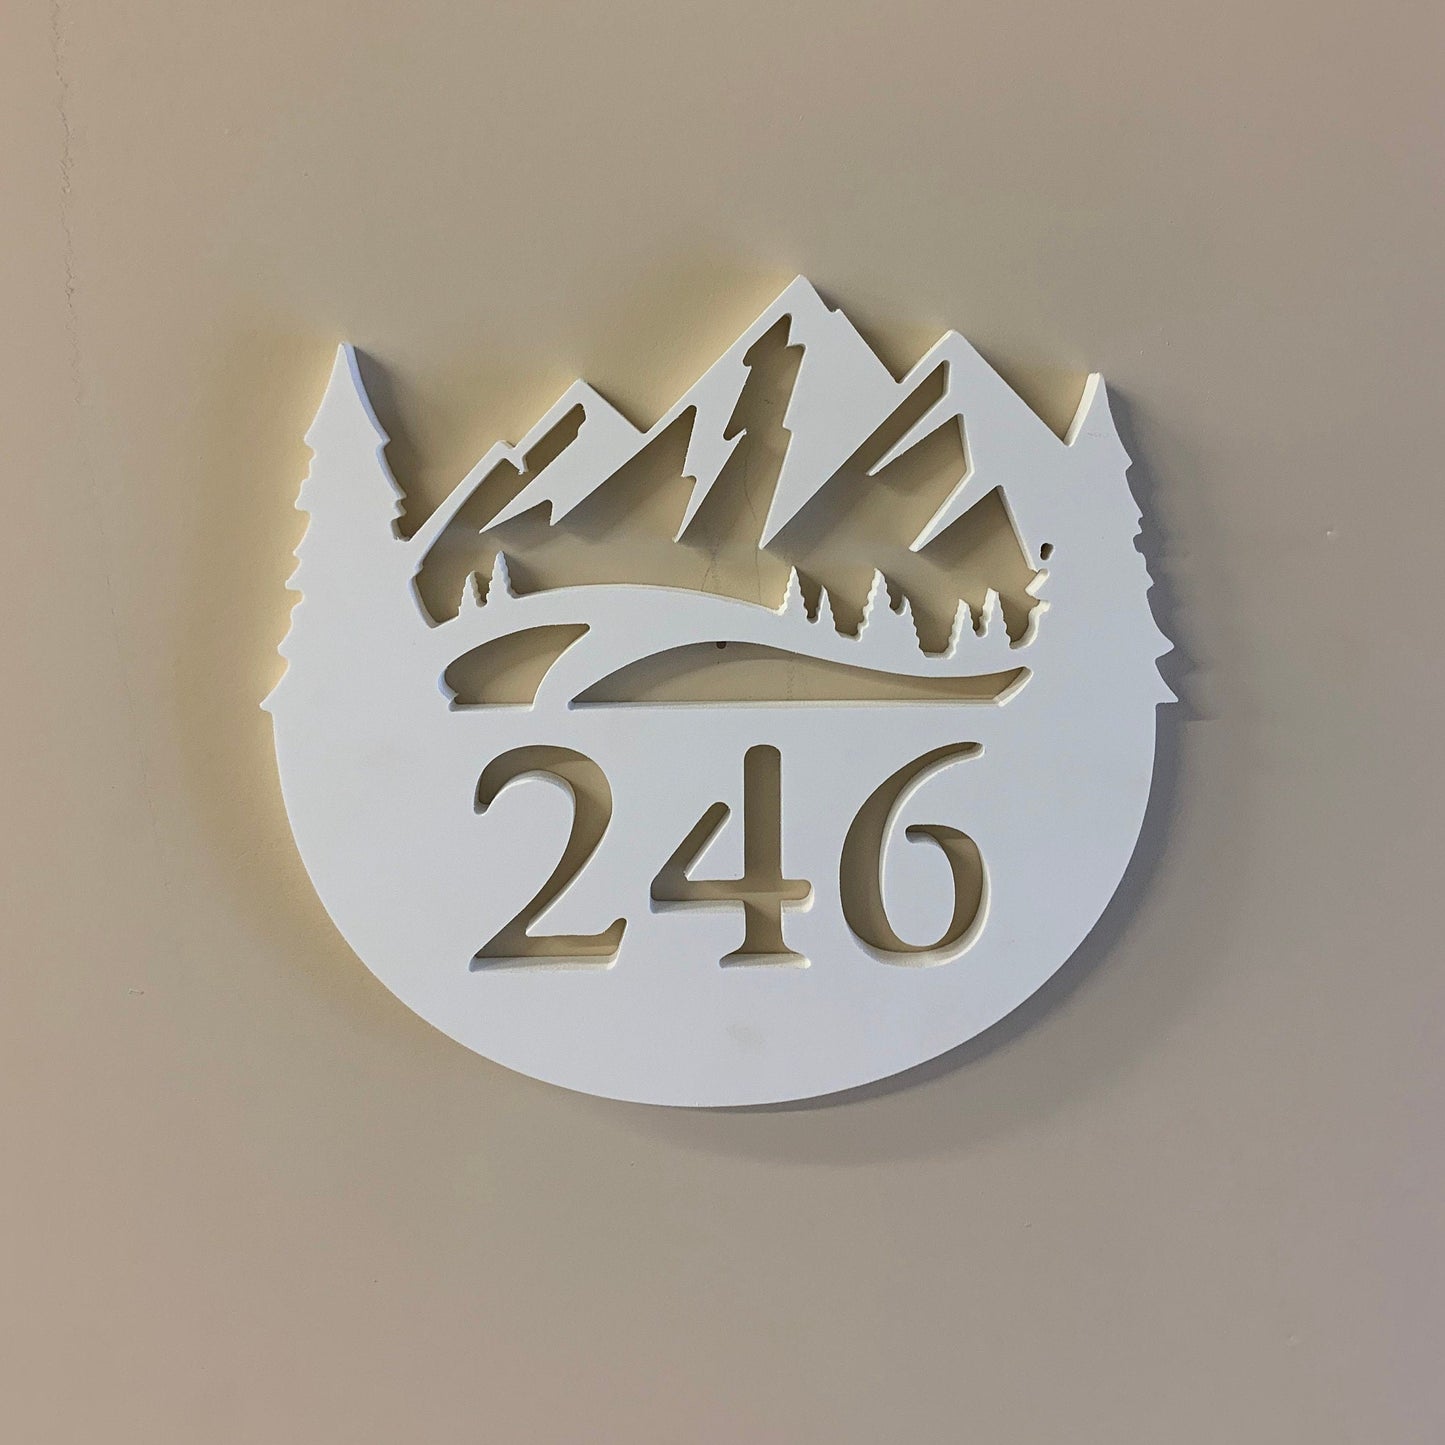 House Number Plaque - Mountain Range, Address Plaque, Custom, Personalized, Housewarming Gift, Outdoor Decor, Ships Free To Mainland USA